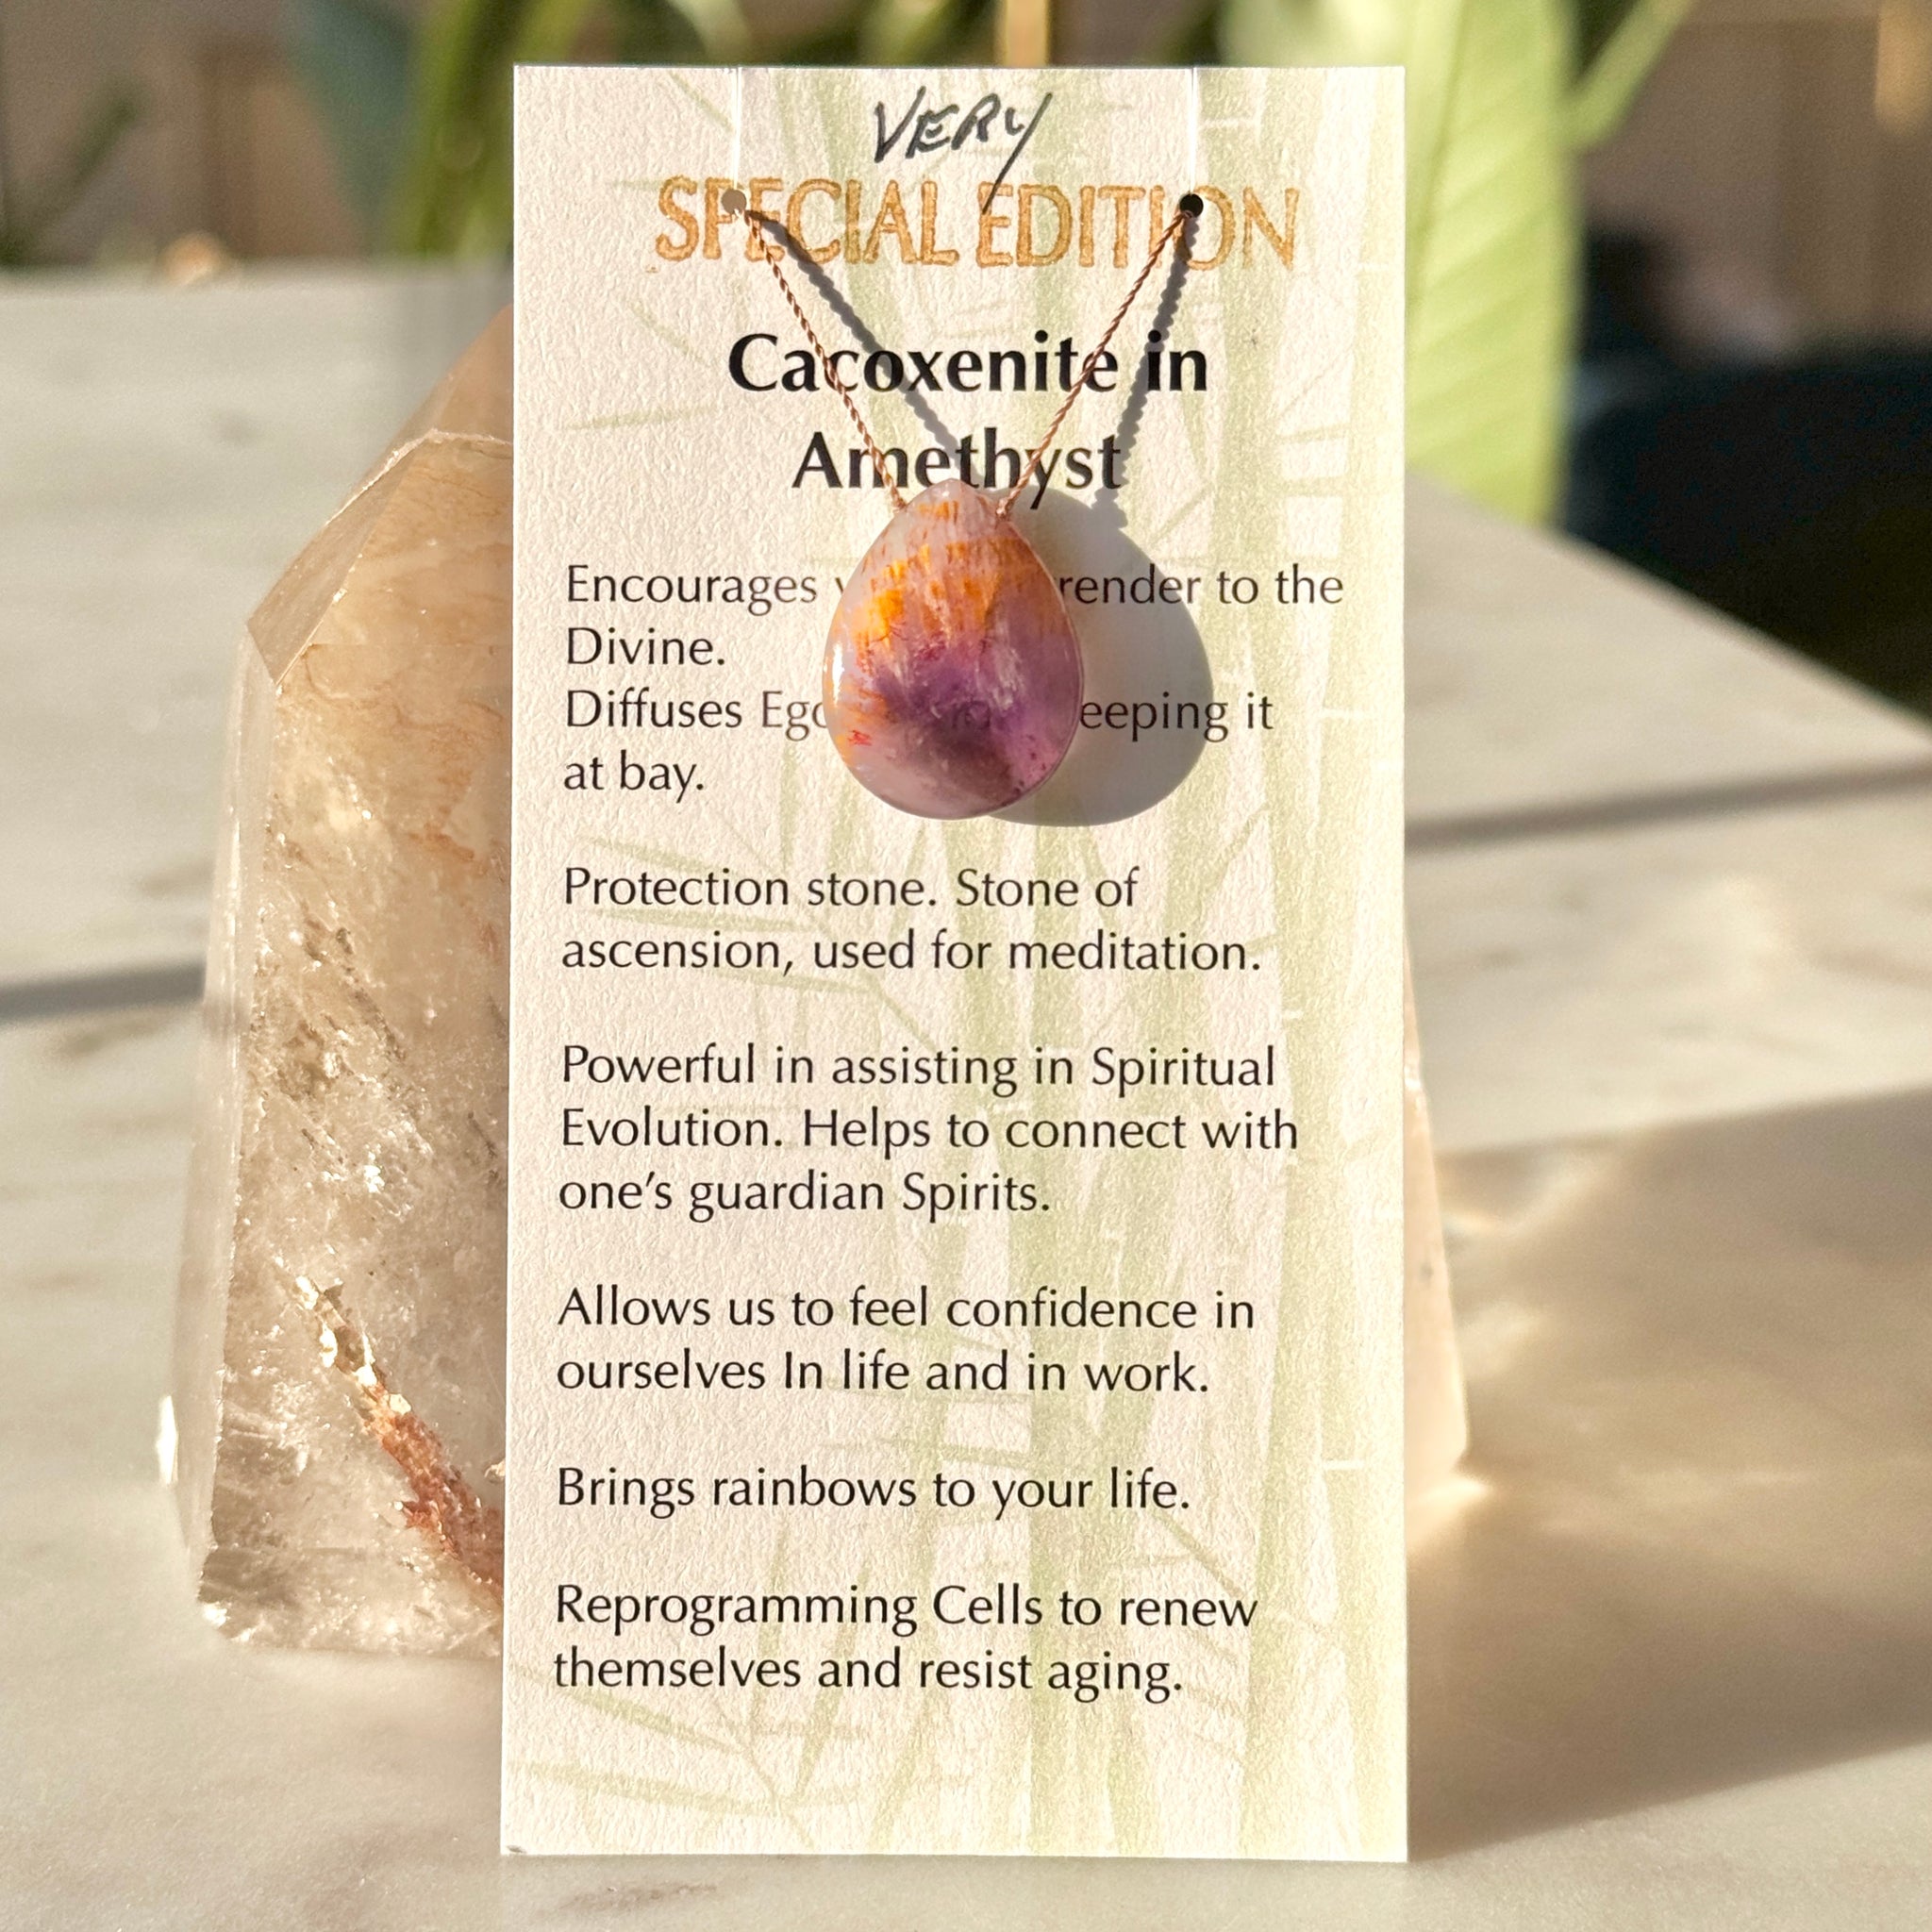 Cacoxenite in Amethyst Very Special Edition